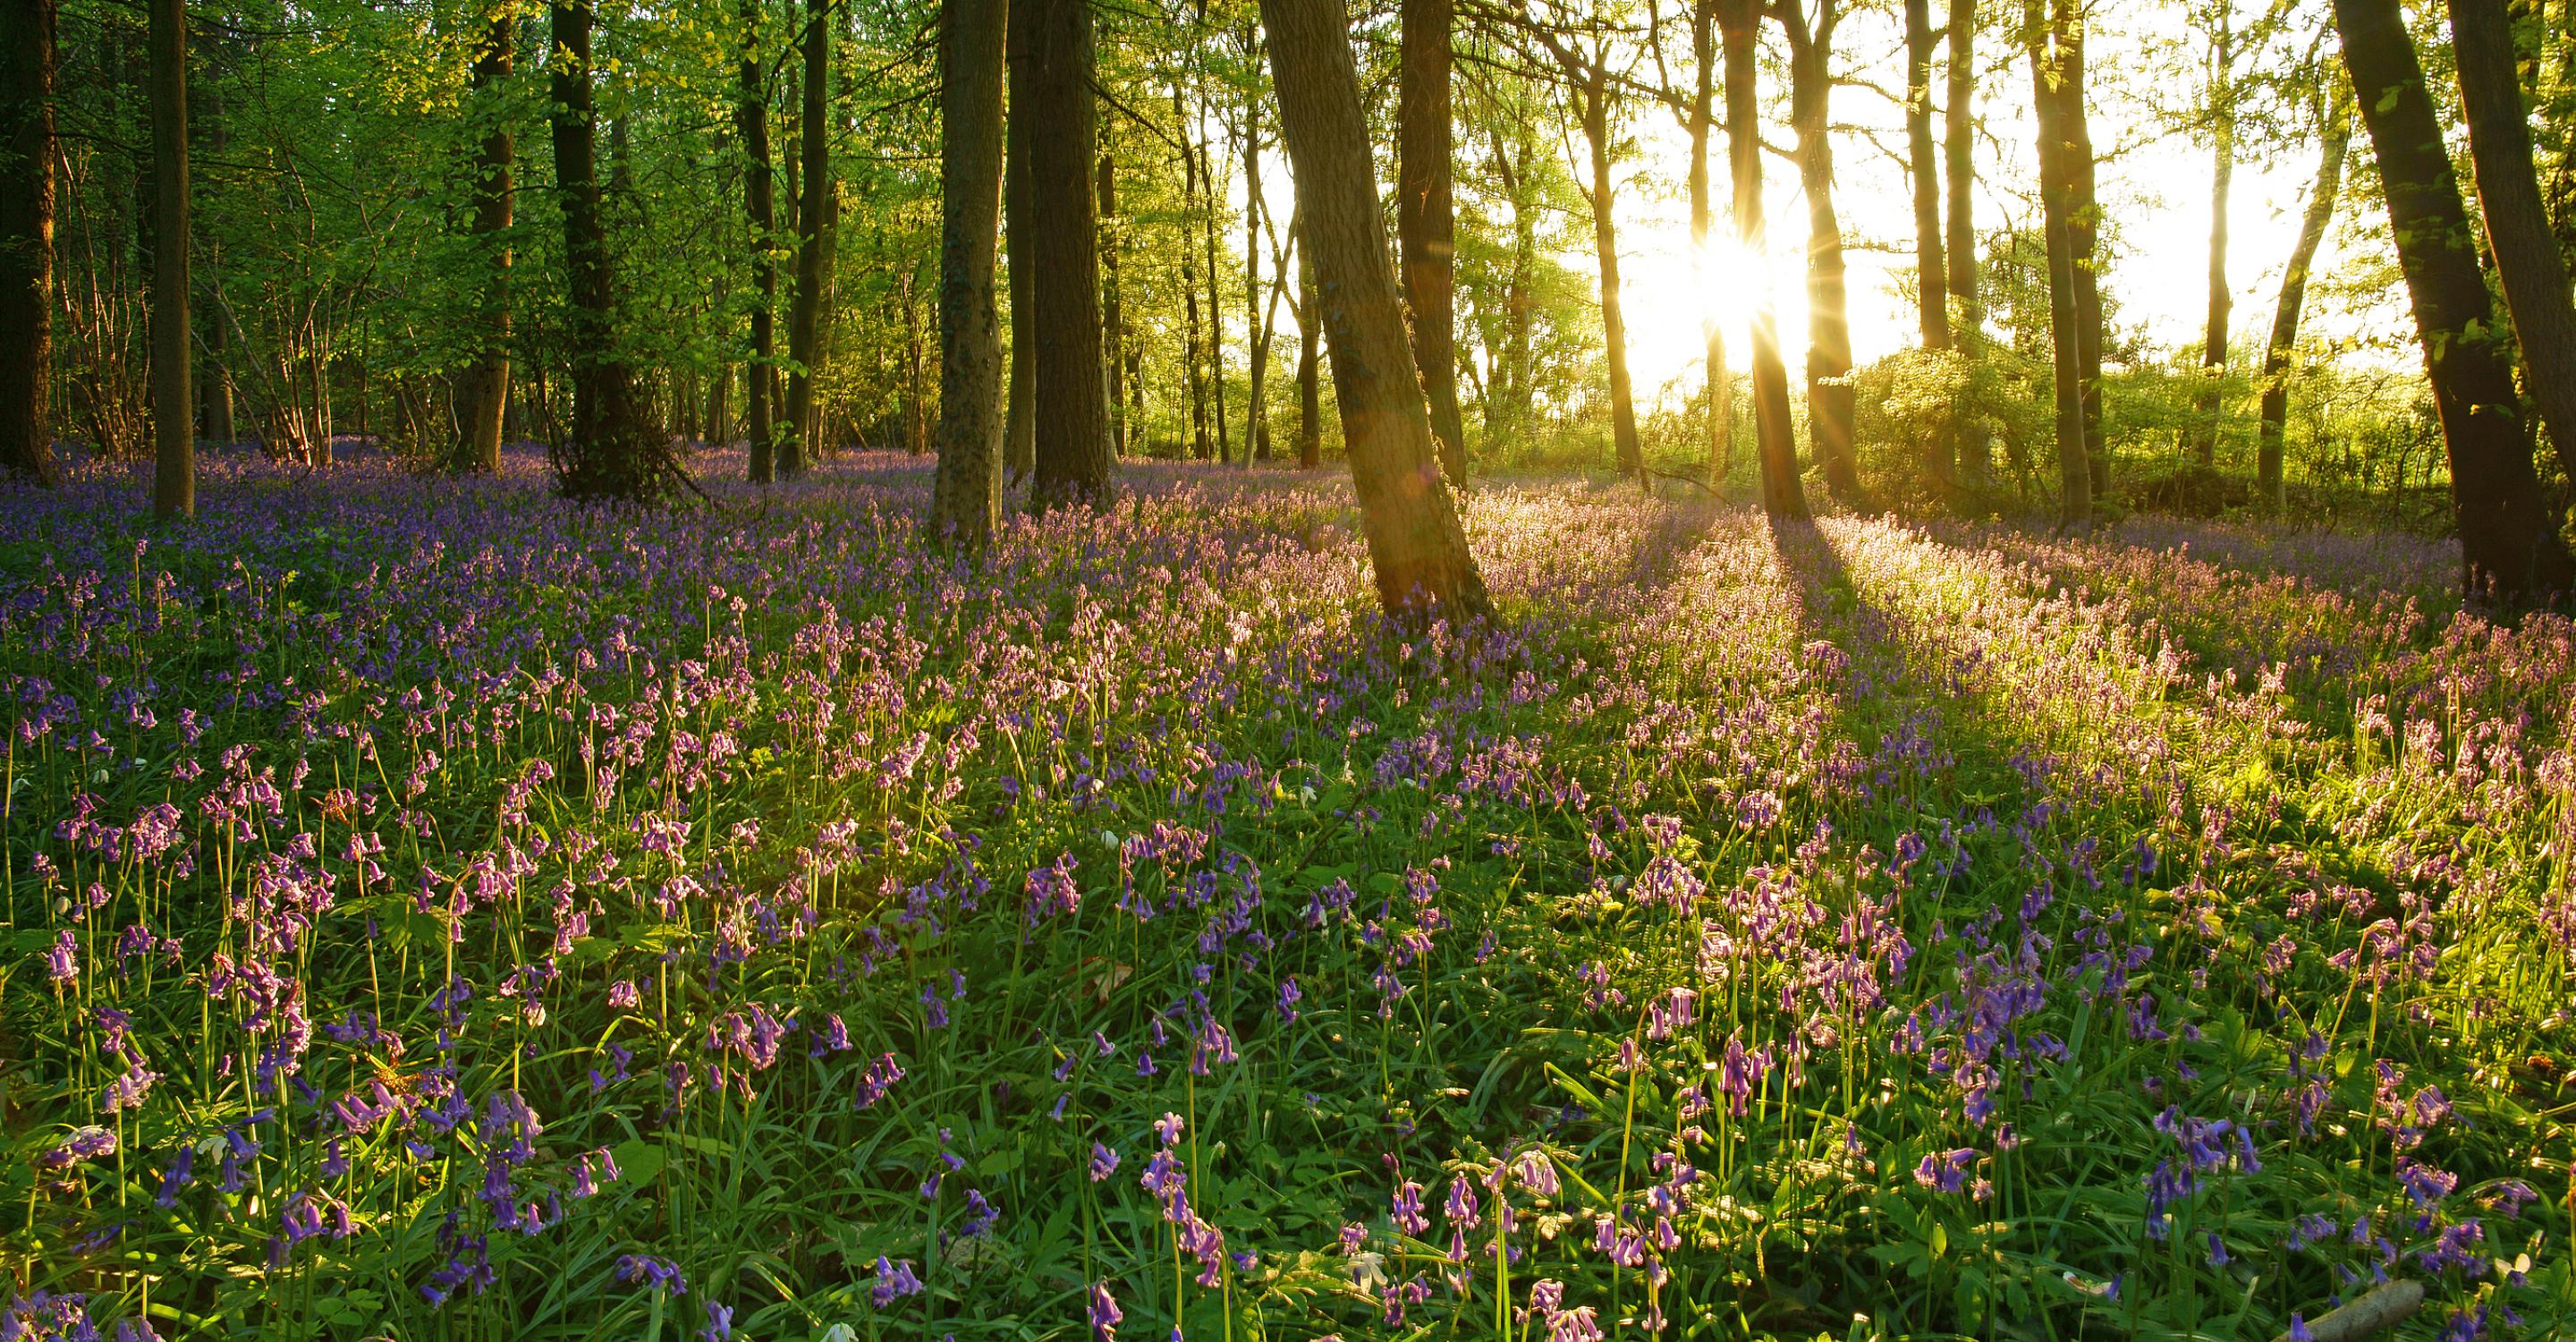 Sunlight breaks through the trees onto a field of purple flowers in the Cotswolds, England